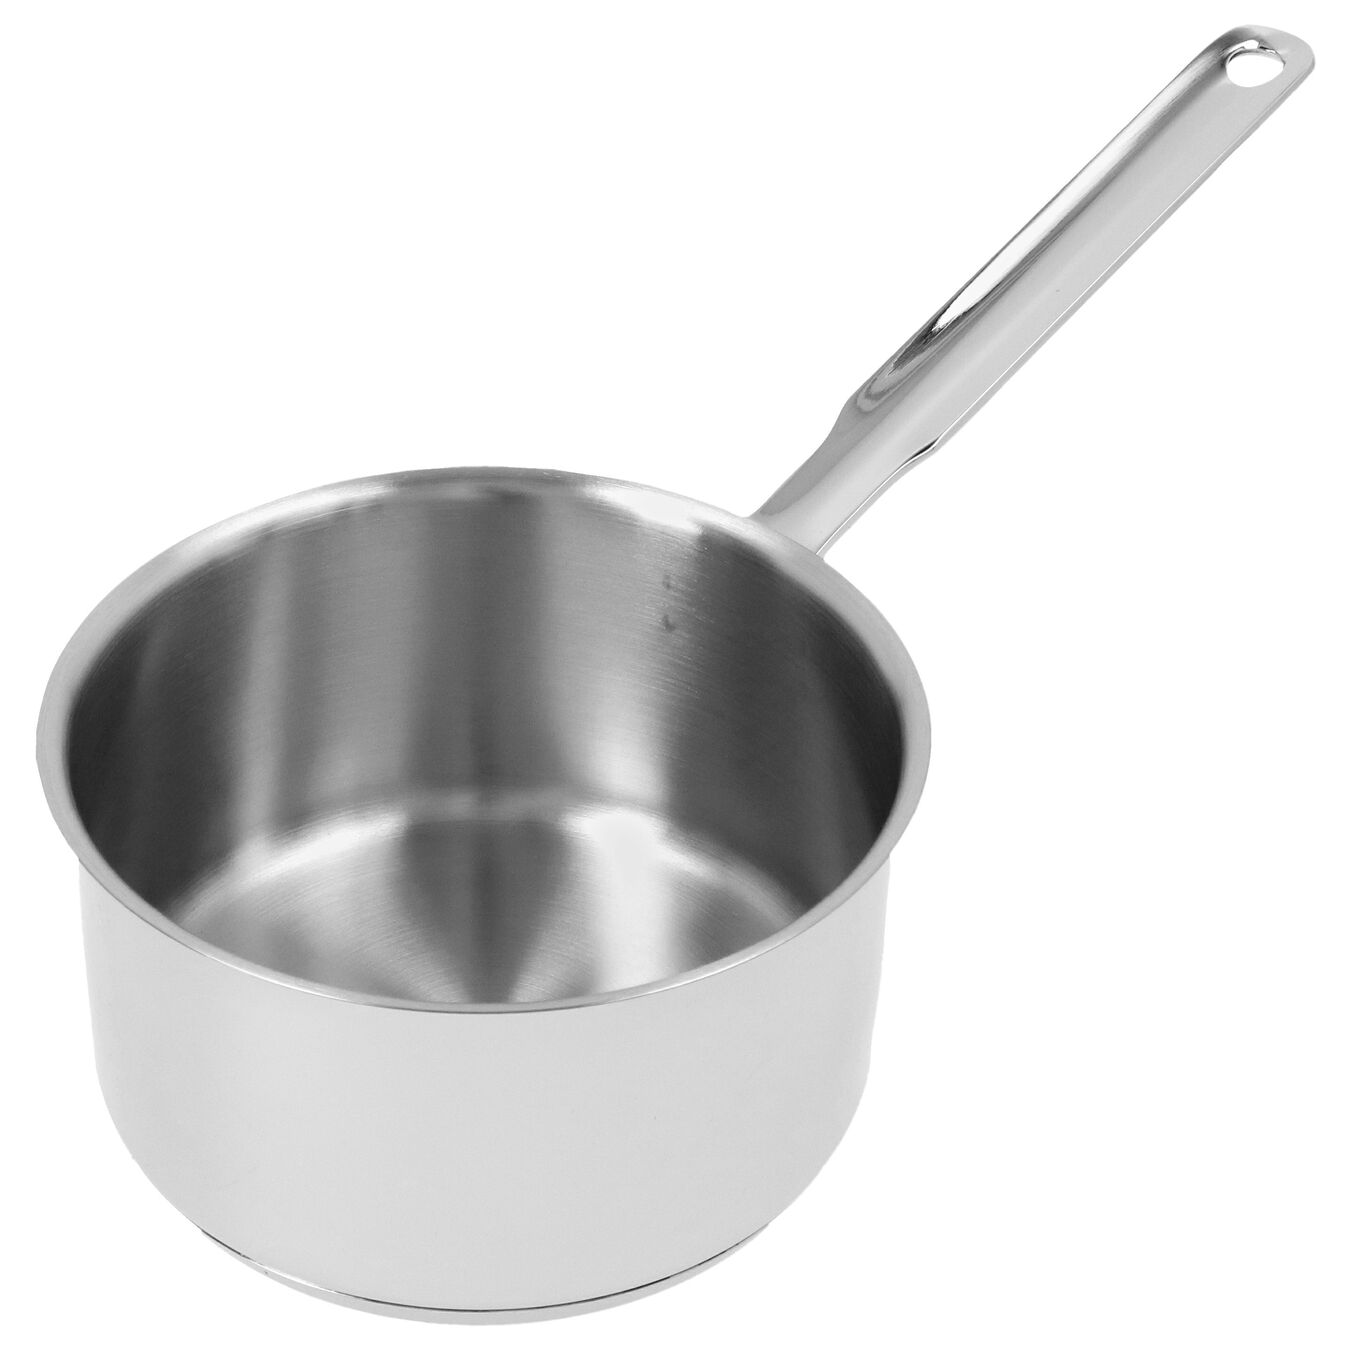 12 cm 18/10 Stainless Steel Saucepan without lid silver,,large 4